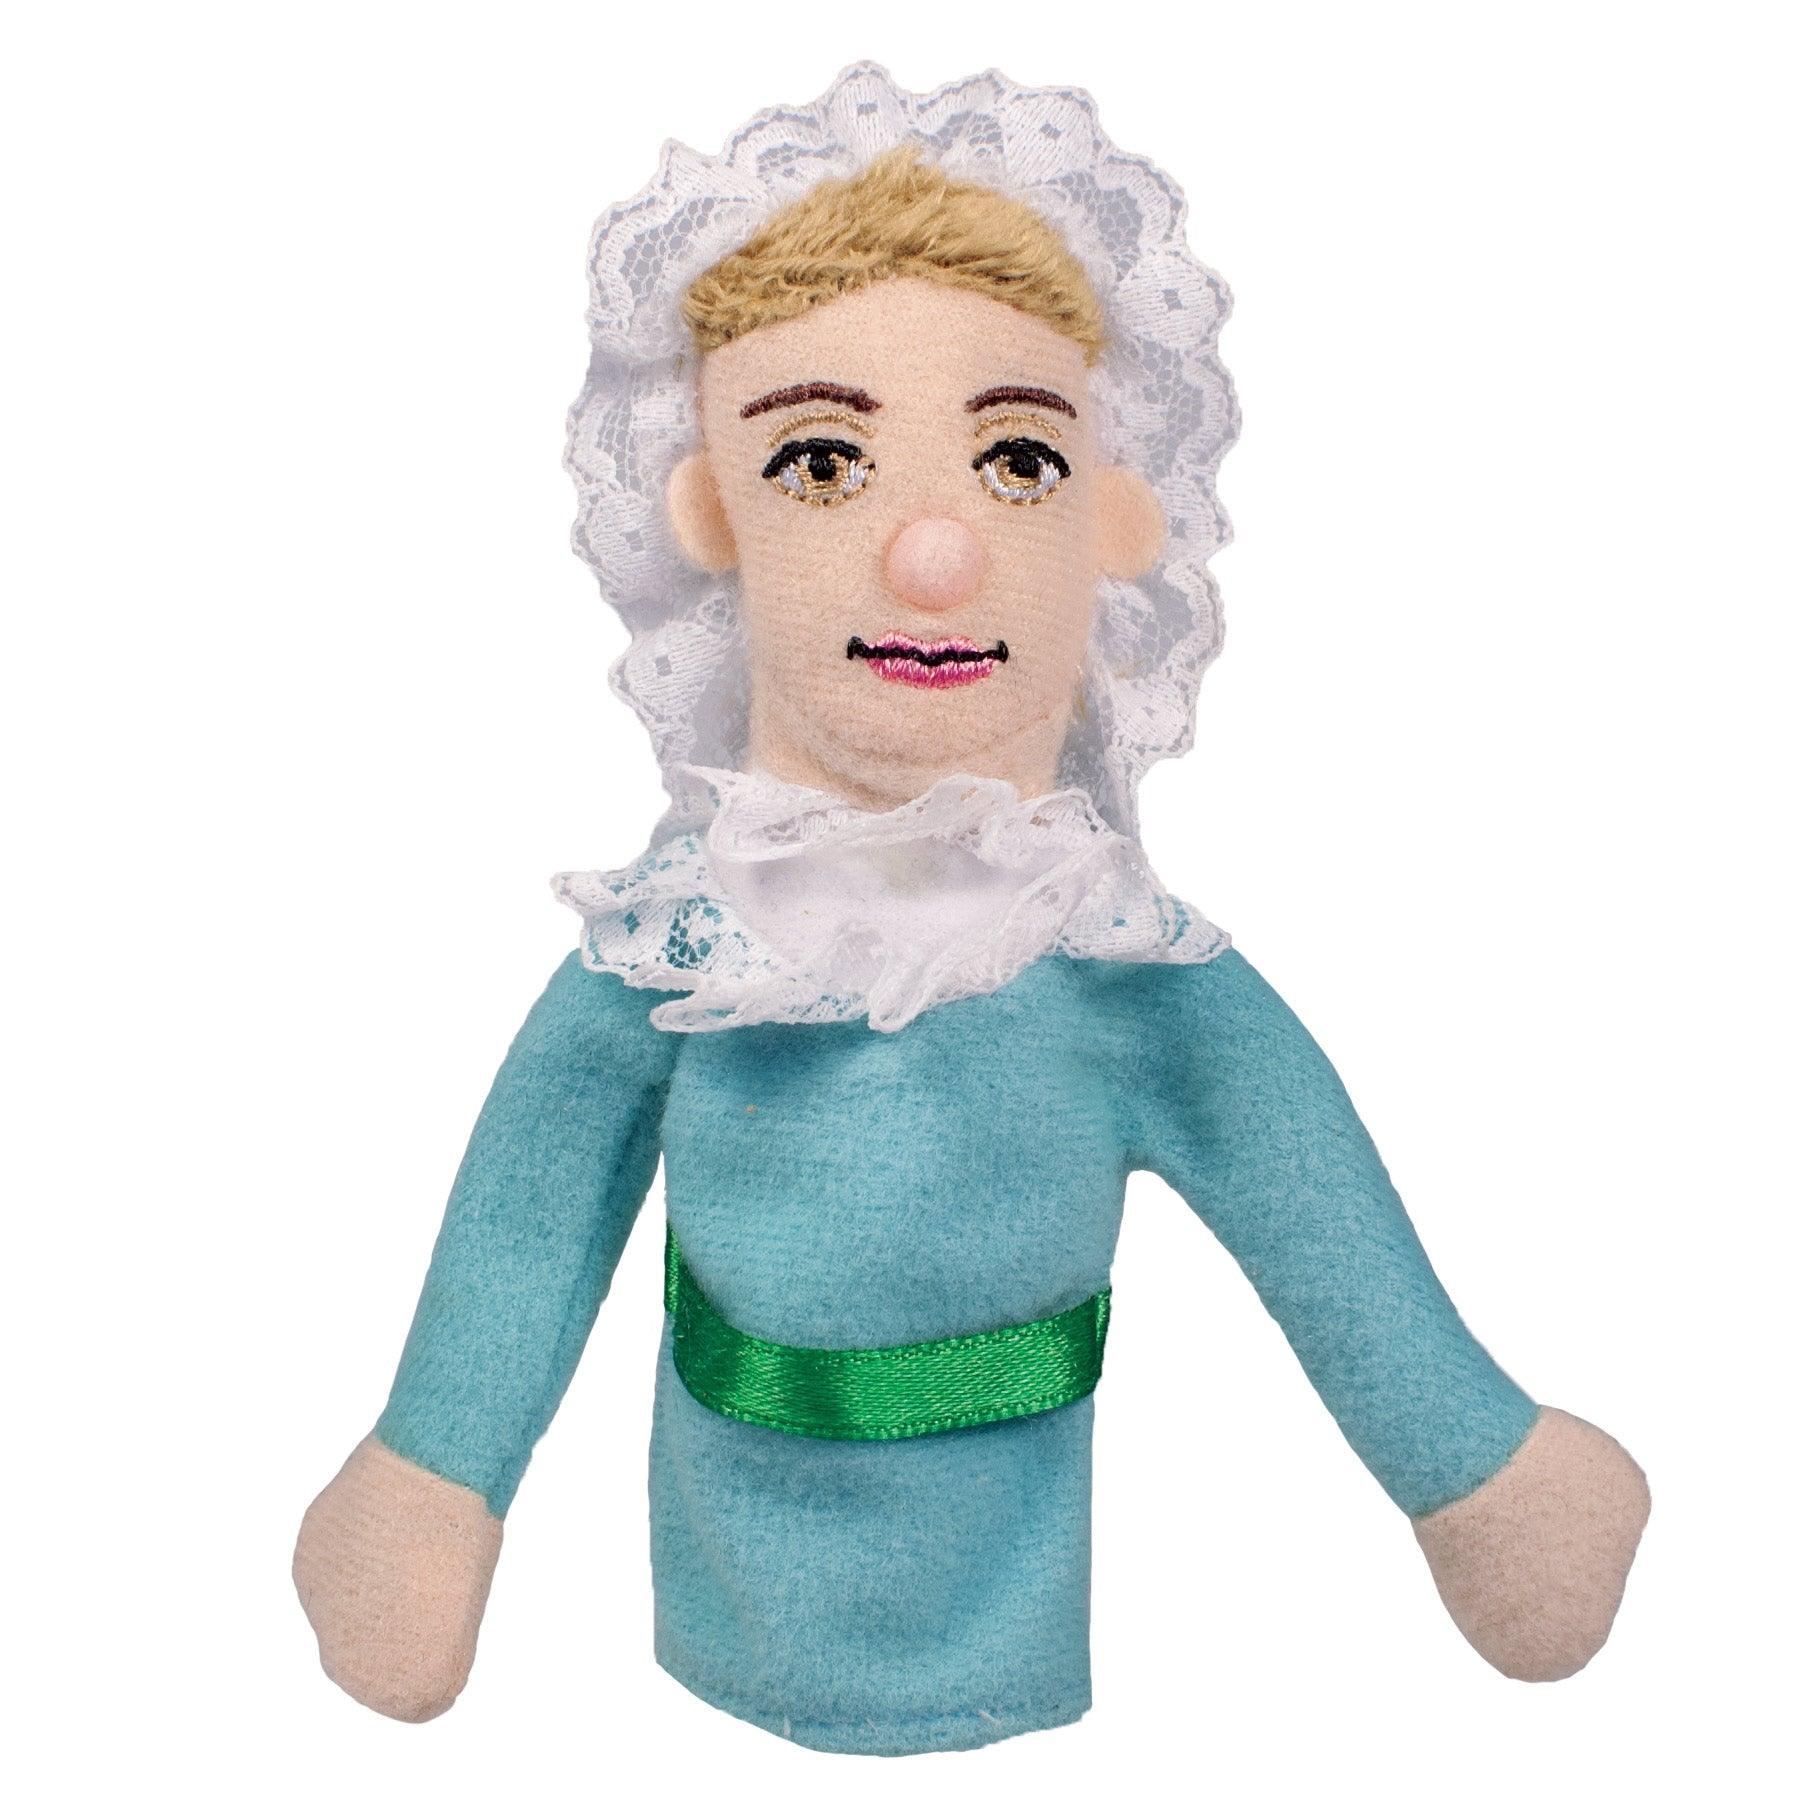 Product photo of Jane Austen Finger Puppet, a novelty gift manufactured by The Unemployed Philosophers Guild.